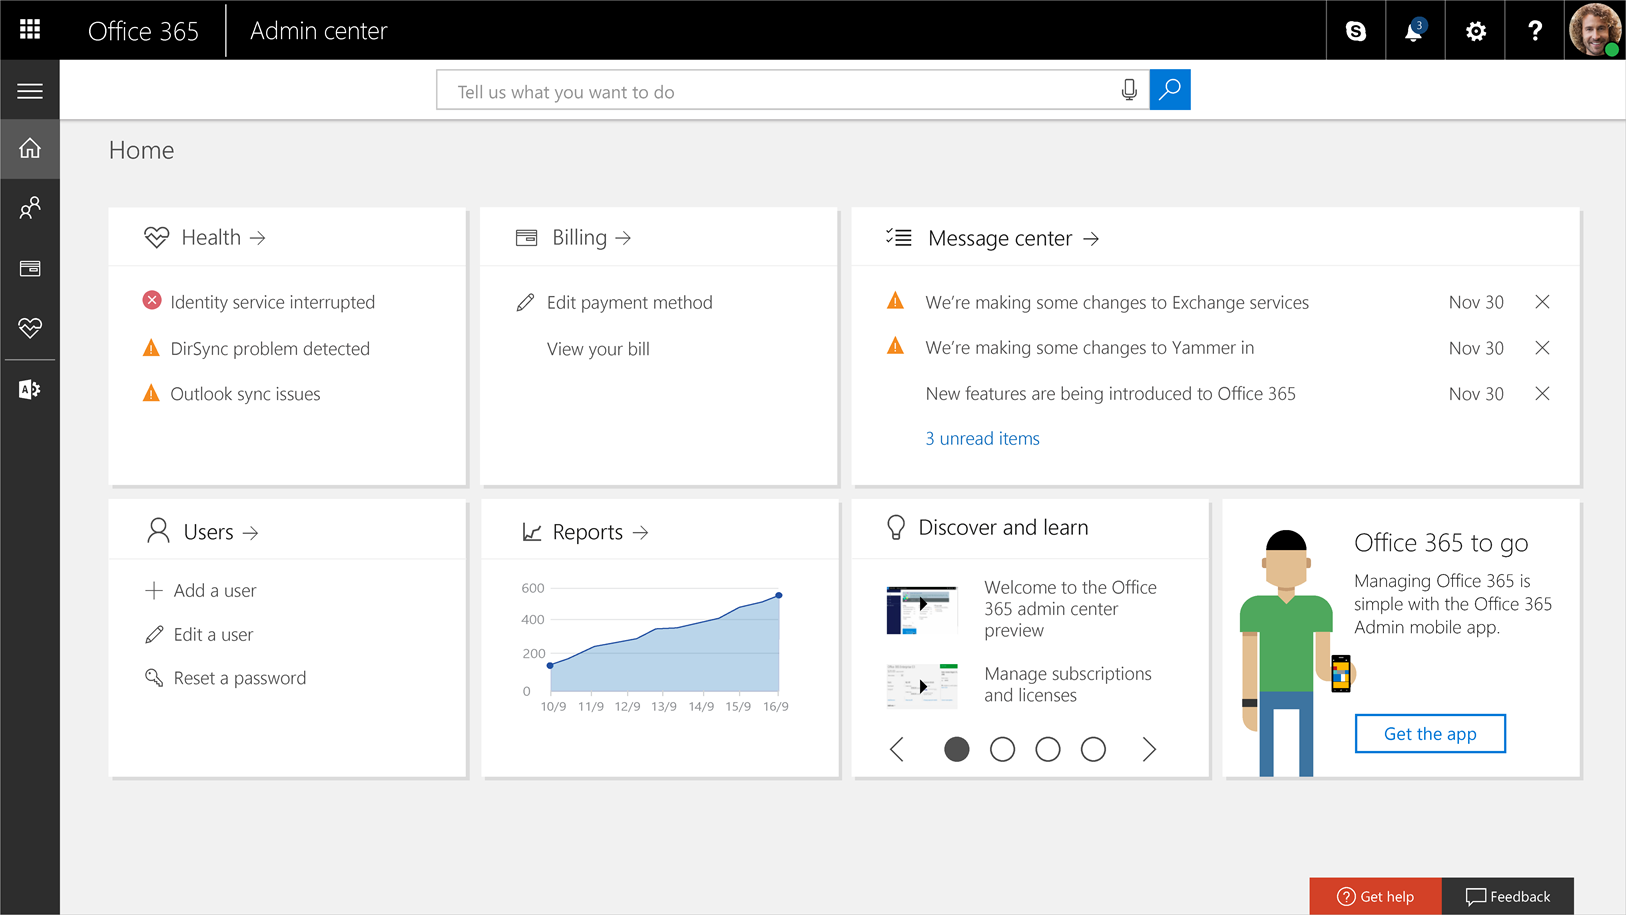 Microsoft highlights latest updates to Office 365 administration